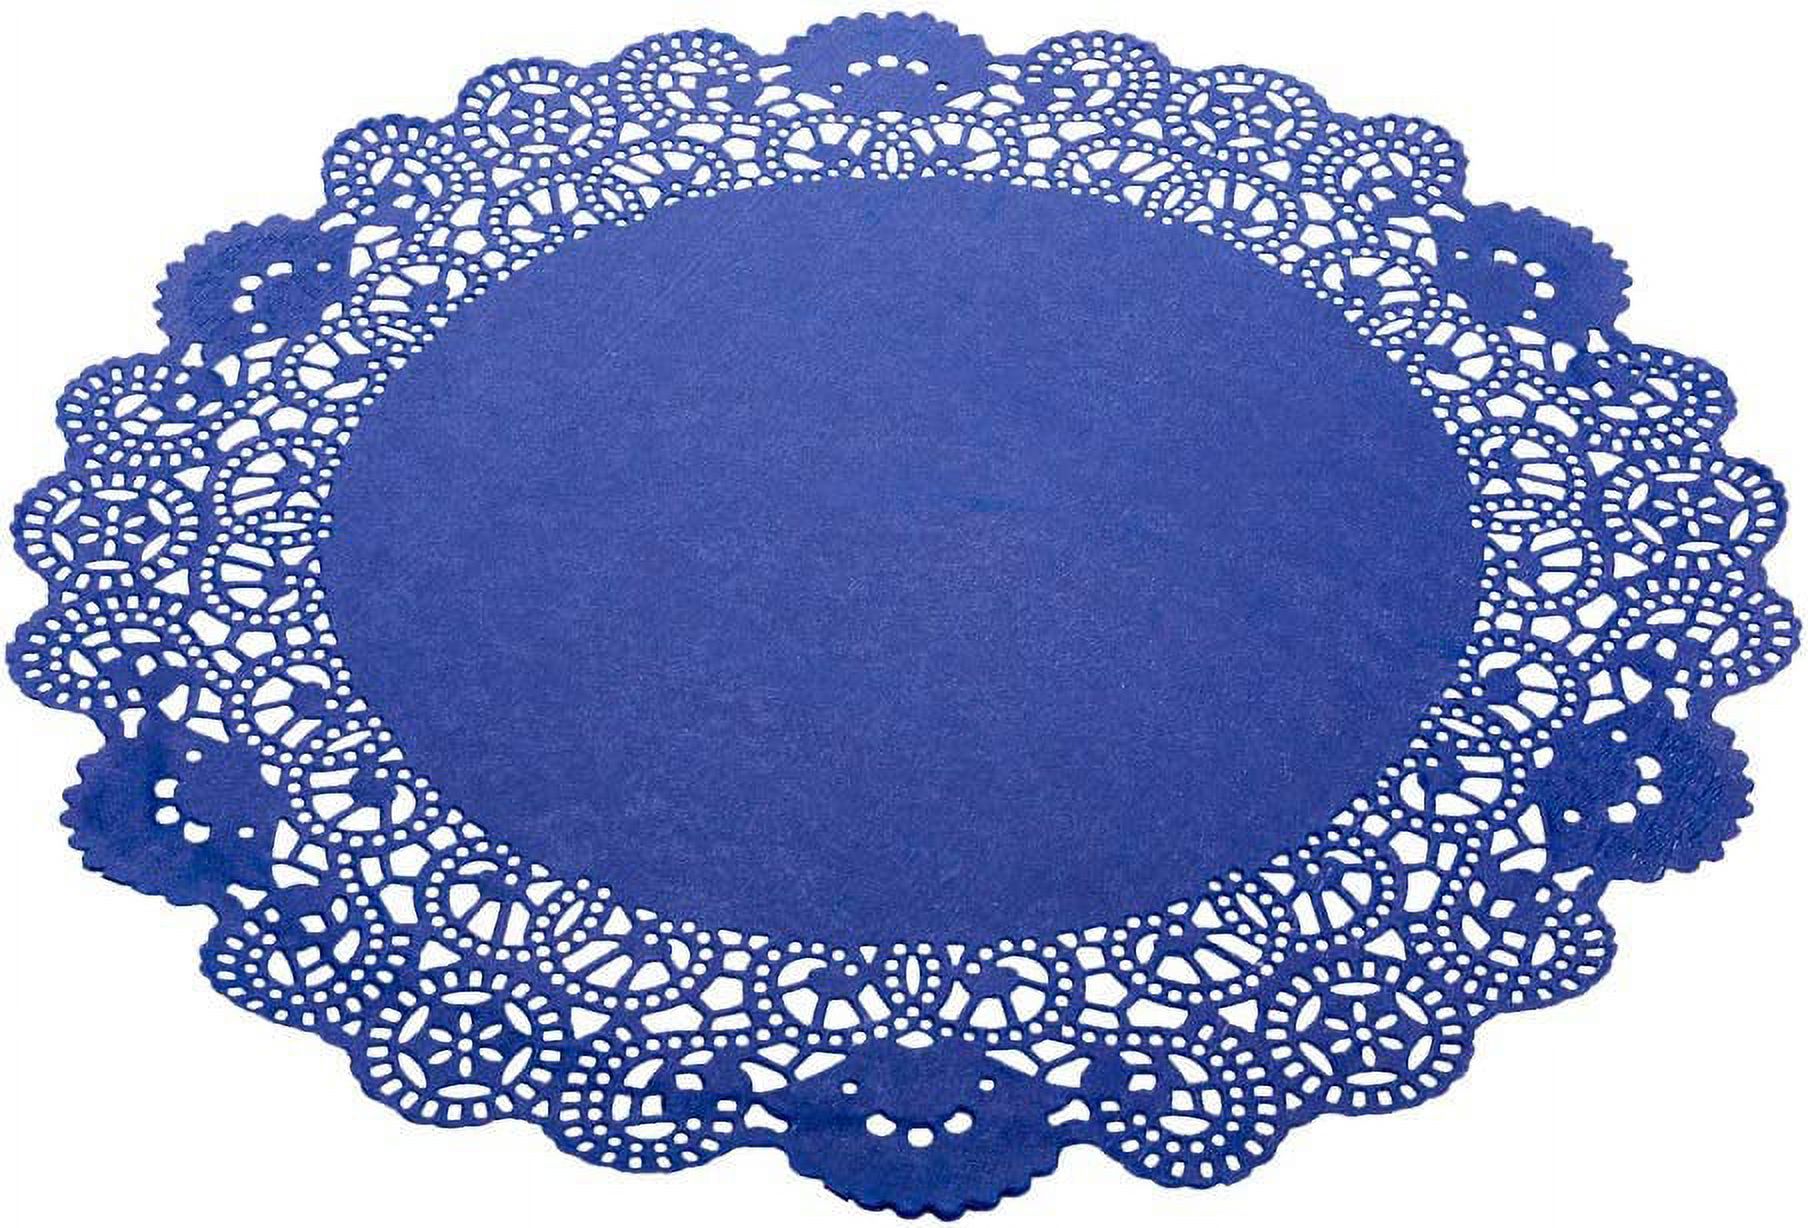 Pastry Tek Navy Blue Paper Doilies - Lace - 12 inch x 12 inch - 100 Count Box